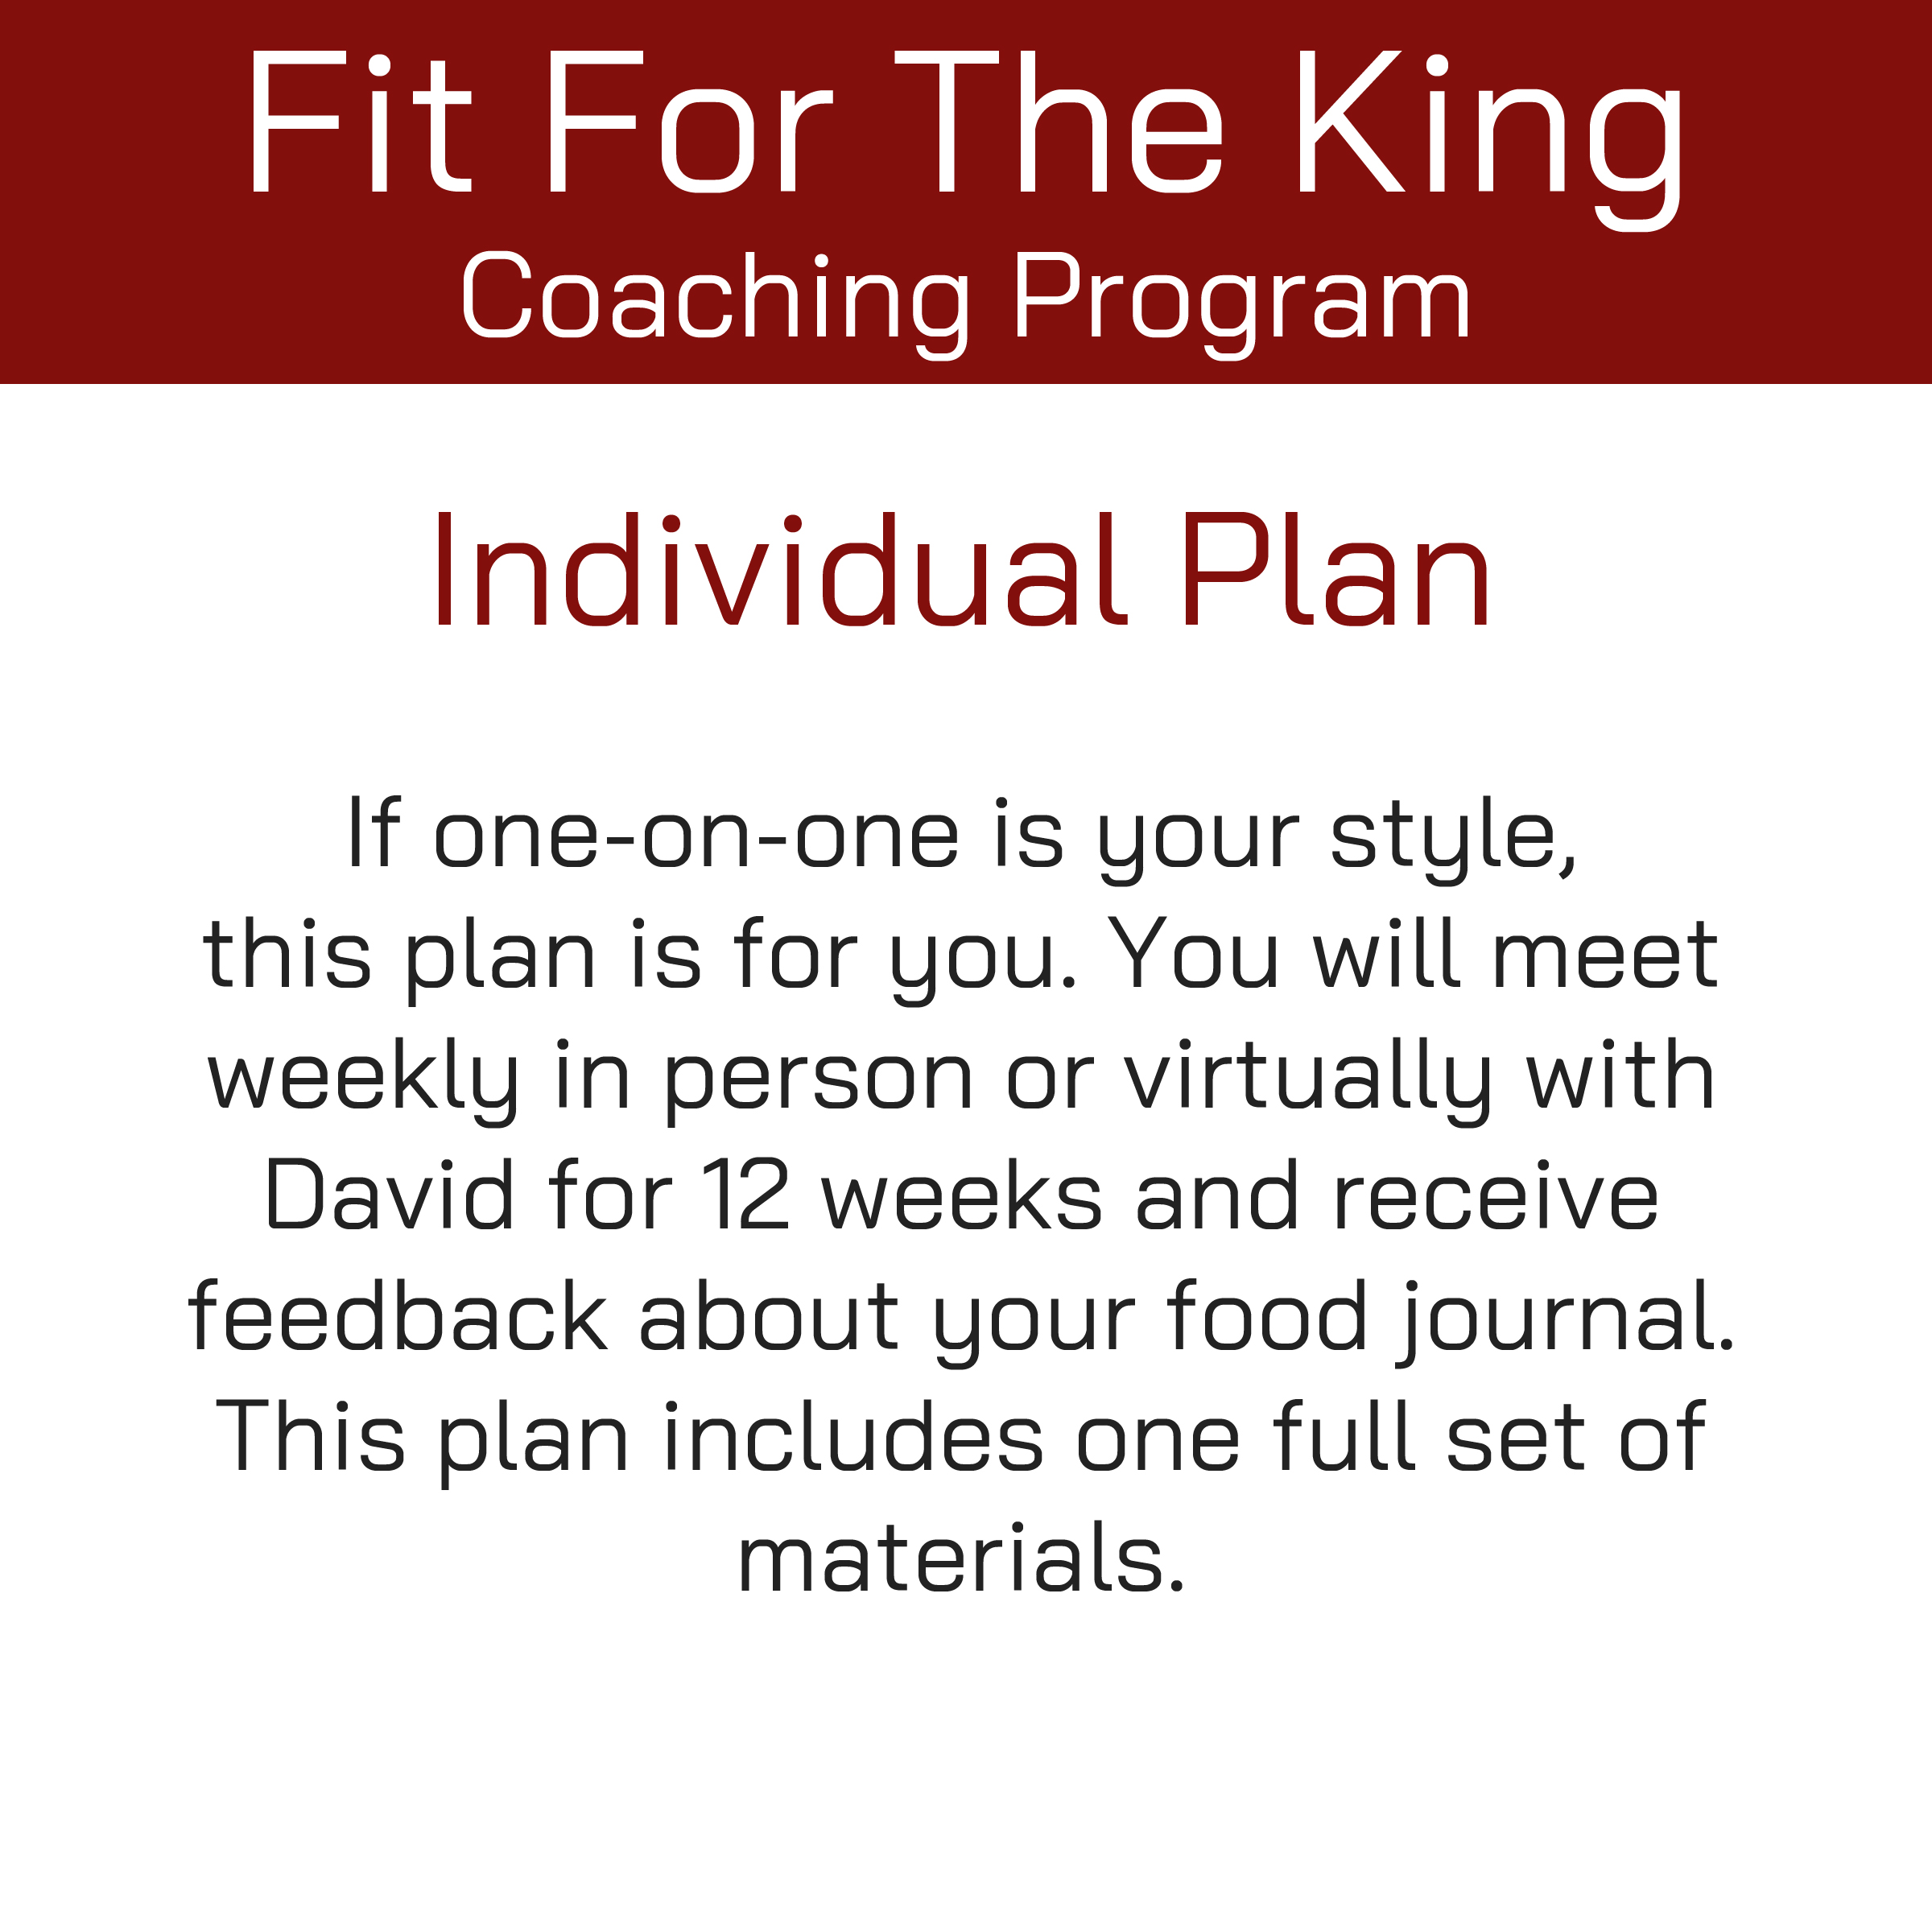 Fit for the King Individual Coaching Plan